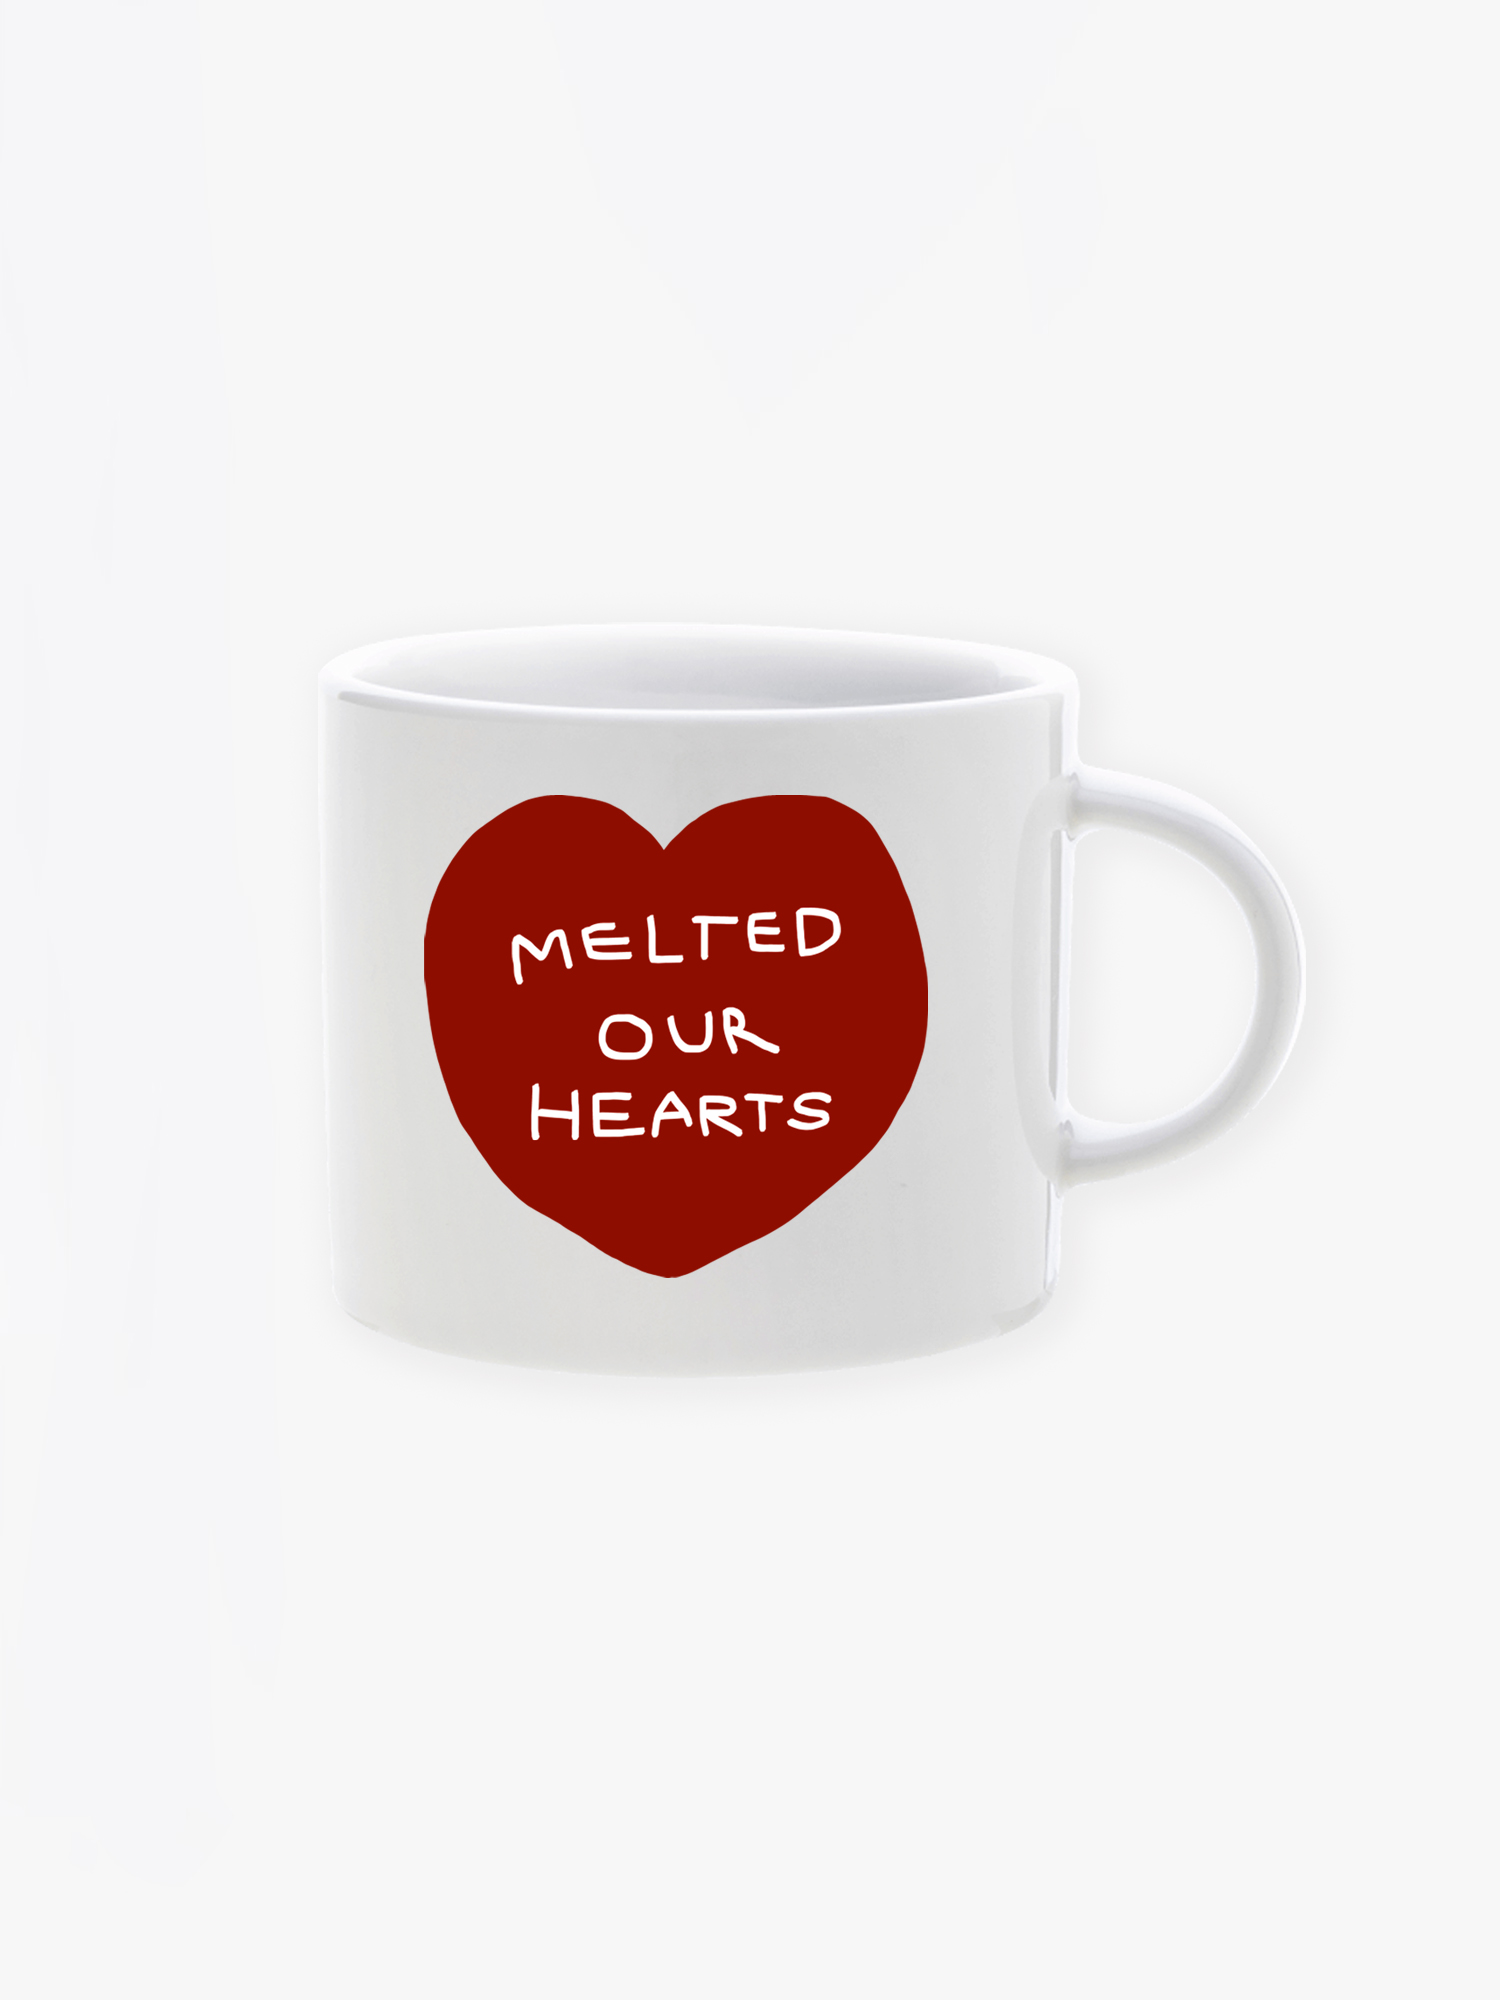 Melted our hearts Mug (Aurora Red)